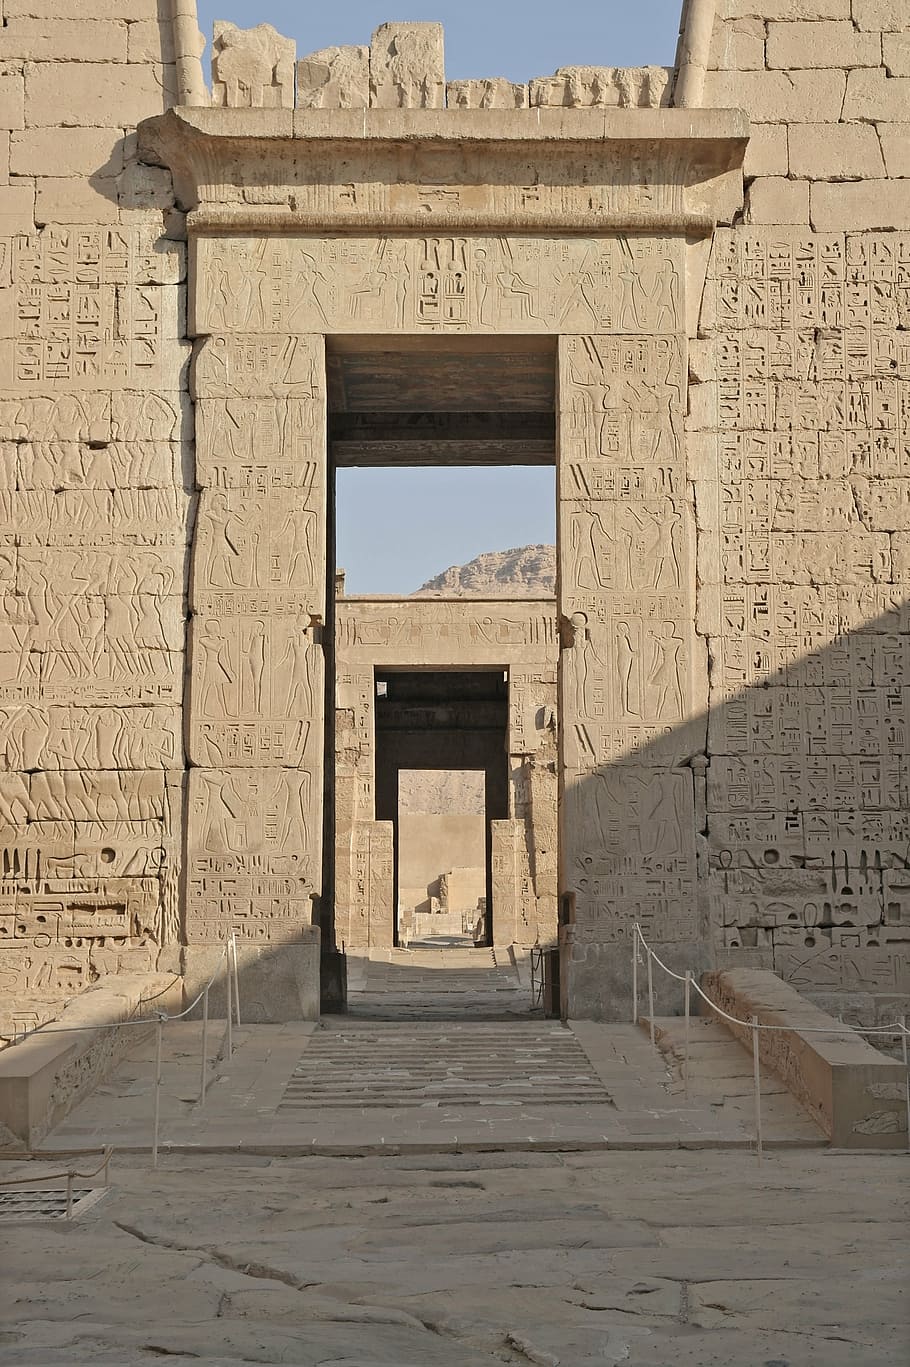 egypt, temple, temple complex, hieroglyphics, nile, historically, pharaohs, old ruin, history, architecture